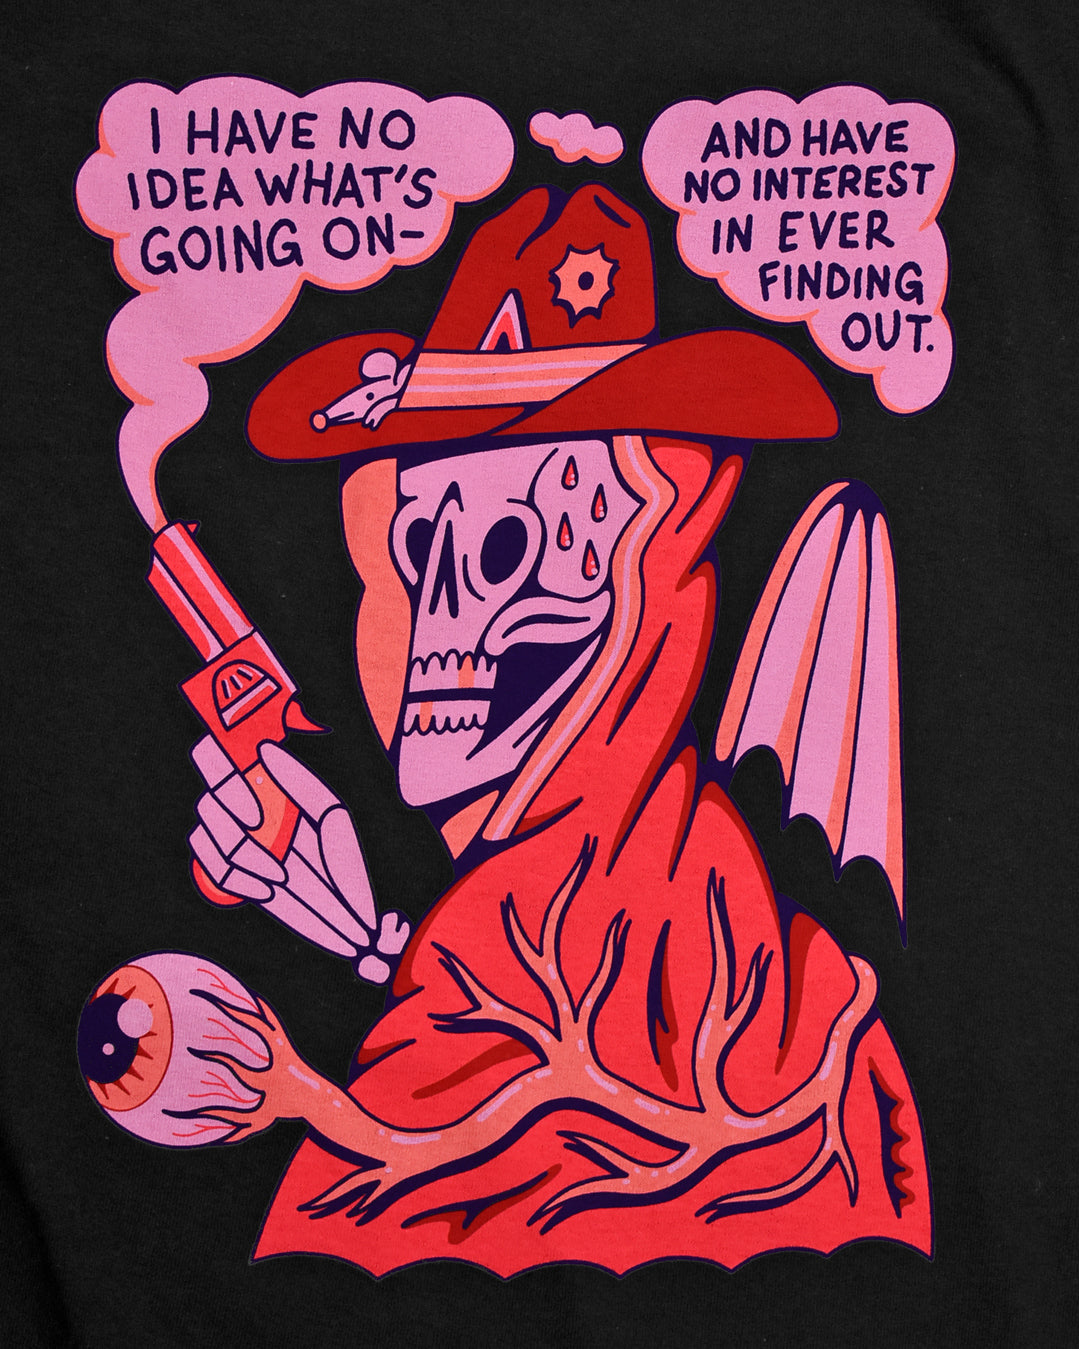 Black background with a bust of a skull in a red cloak and cowboy hat. The skull has 4 sweat drops on it's forehead and 2 gold teeth and is holding a red smoking gun in it's right hand. There is a large eye ball with veins connected to it at the bottom. The top reads I Have No Idea What's Going On and Have No Interest in Ever Finding Out.